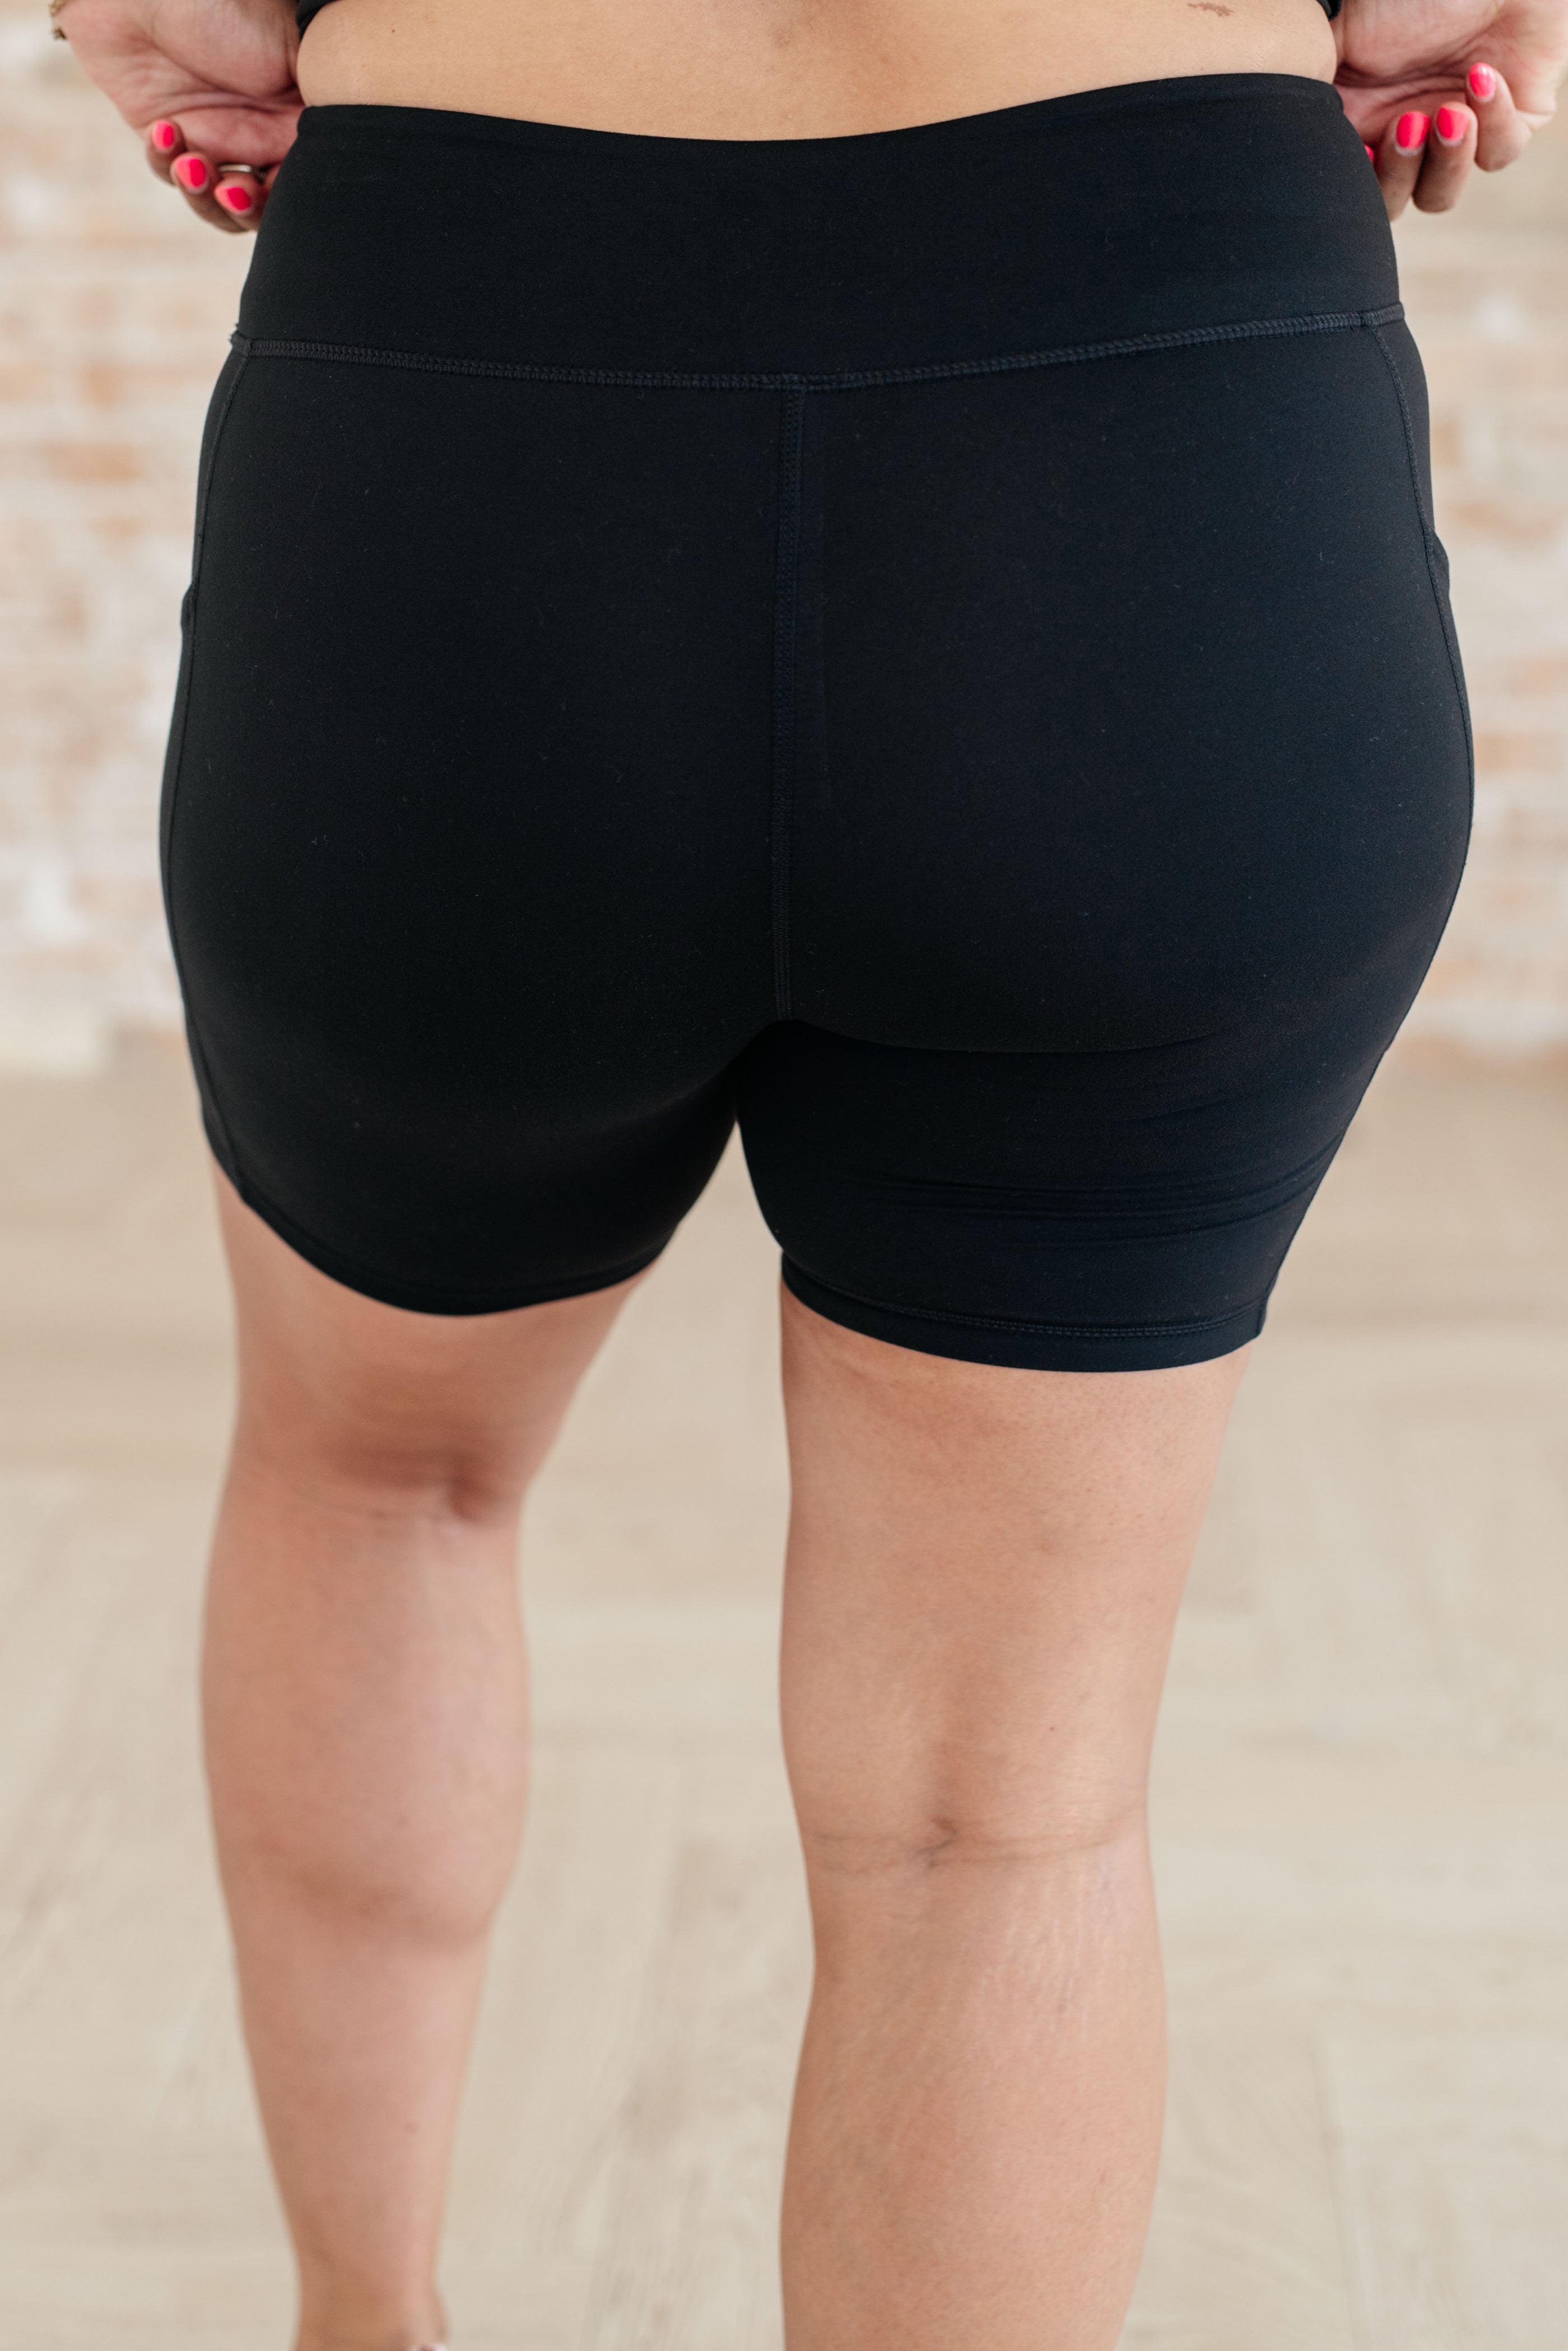 Getting Active Biker Shorts in Black Athleisure Ave Shops   